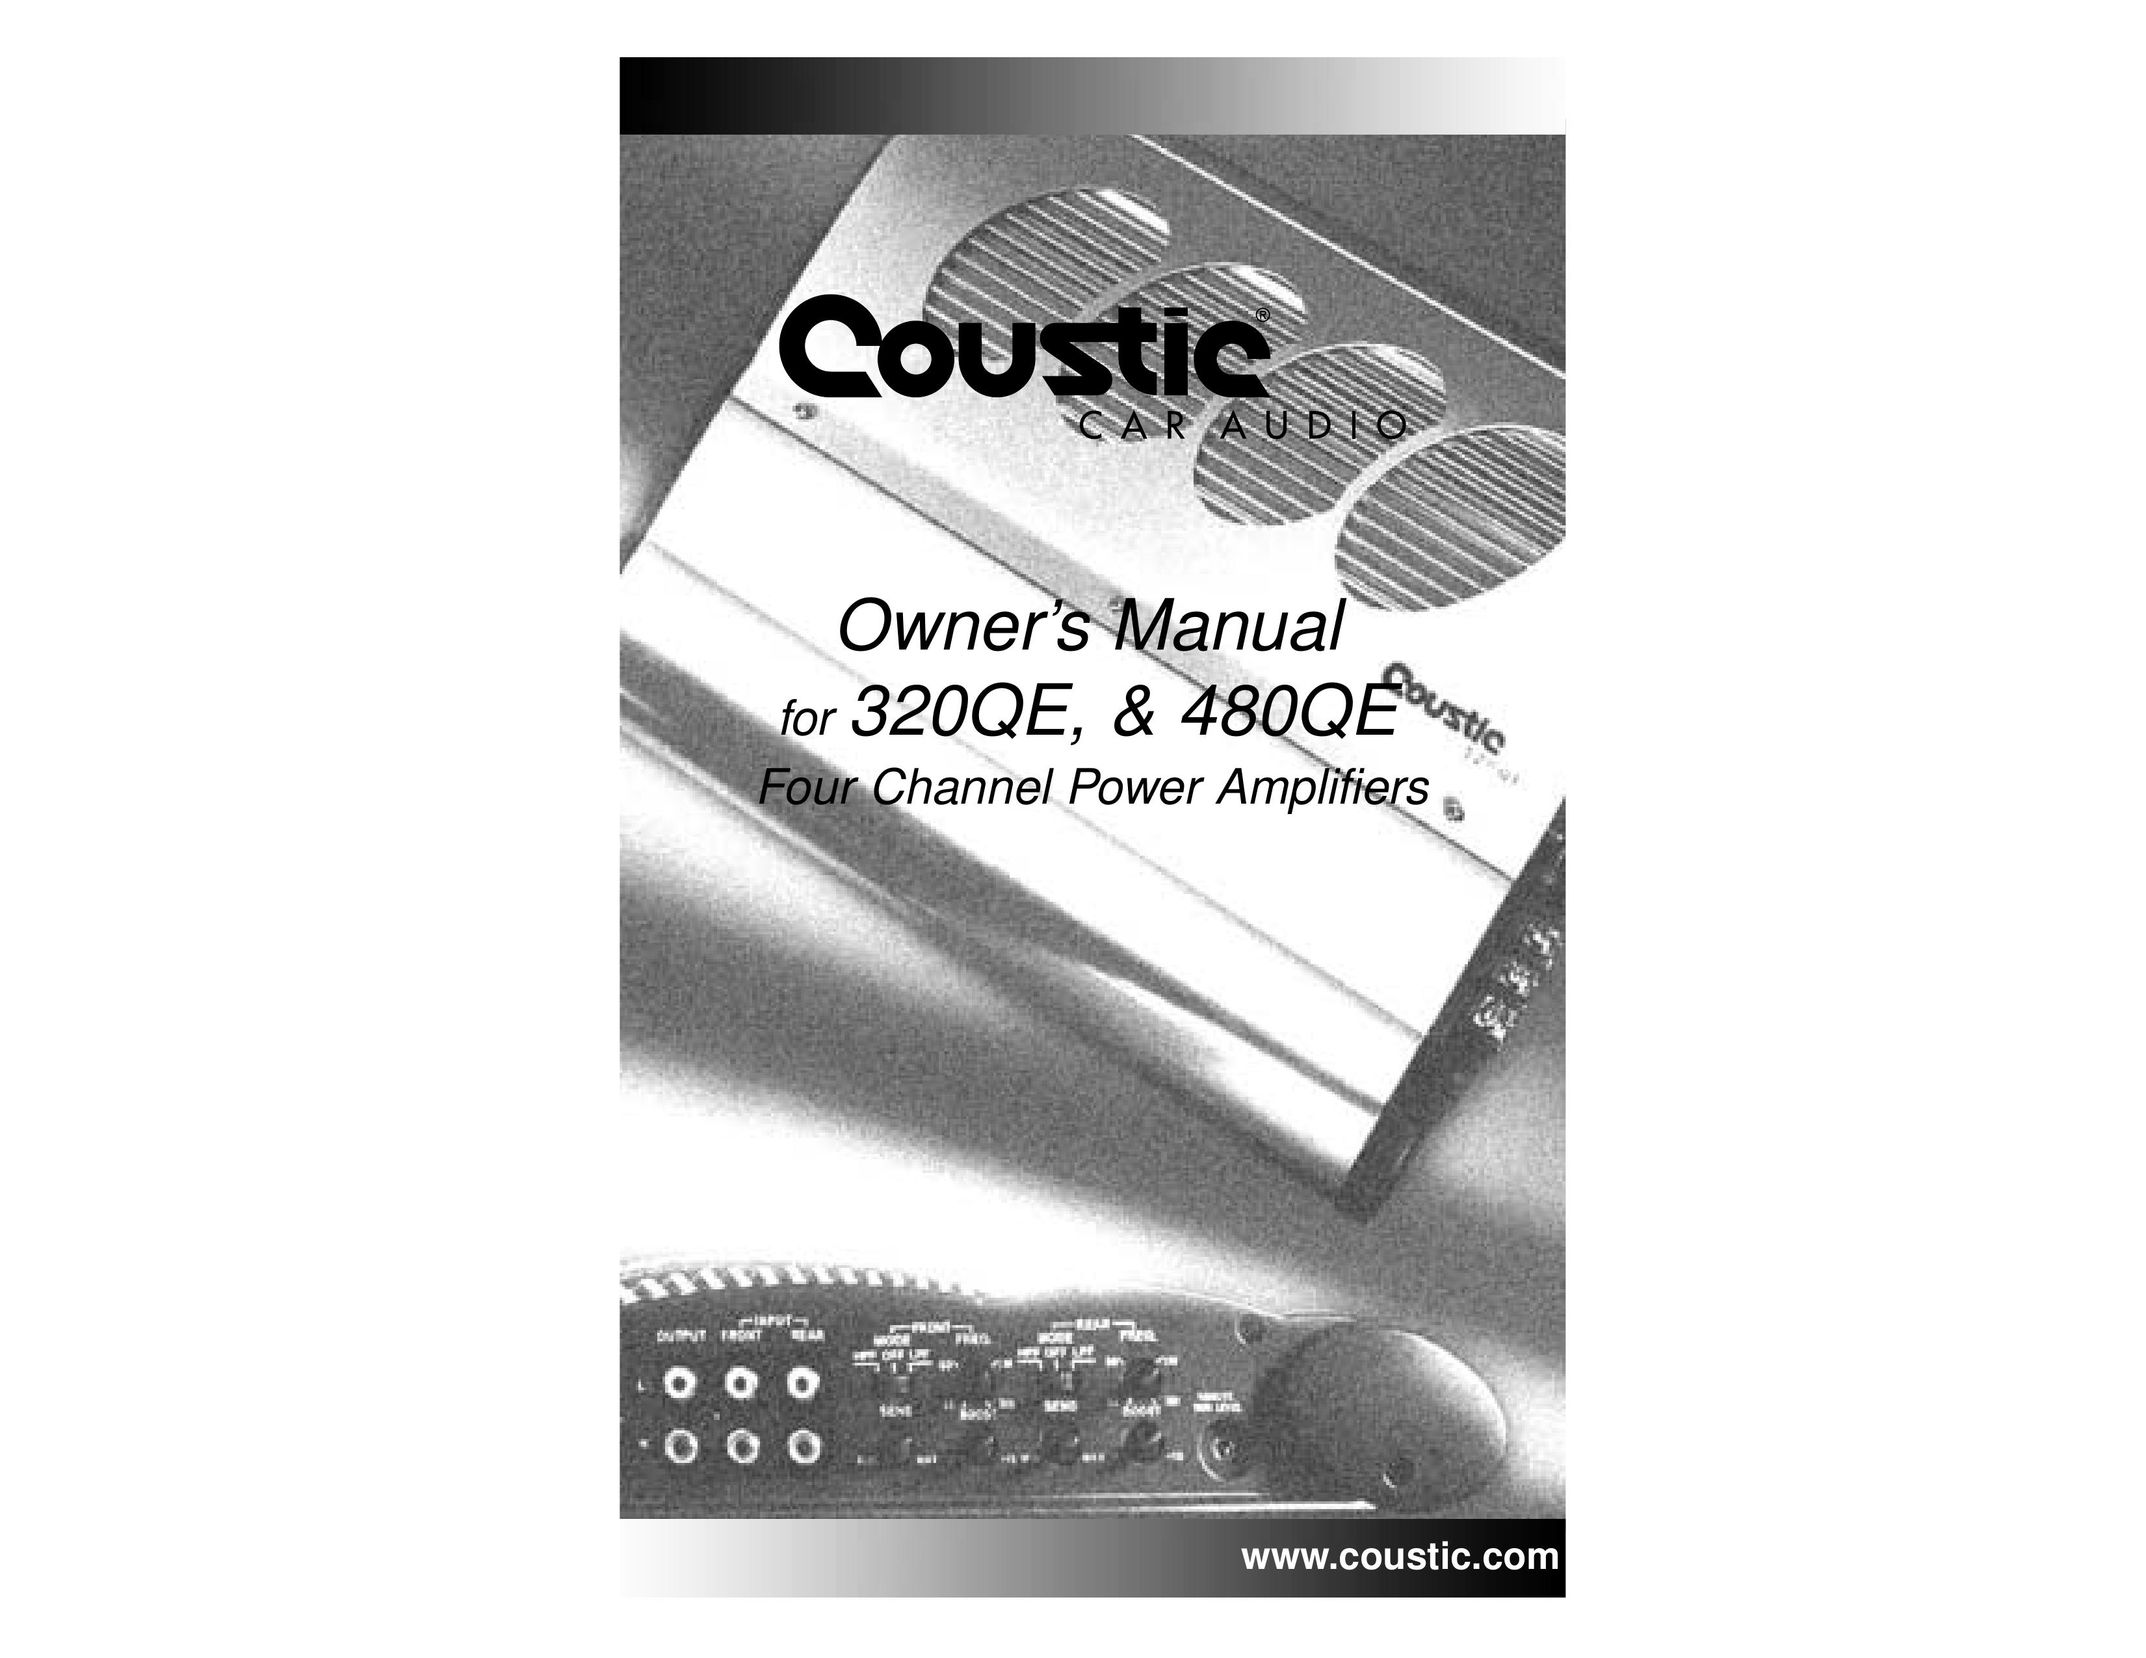 Coustic & 480QE Stereo Amplifier User Manual